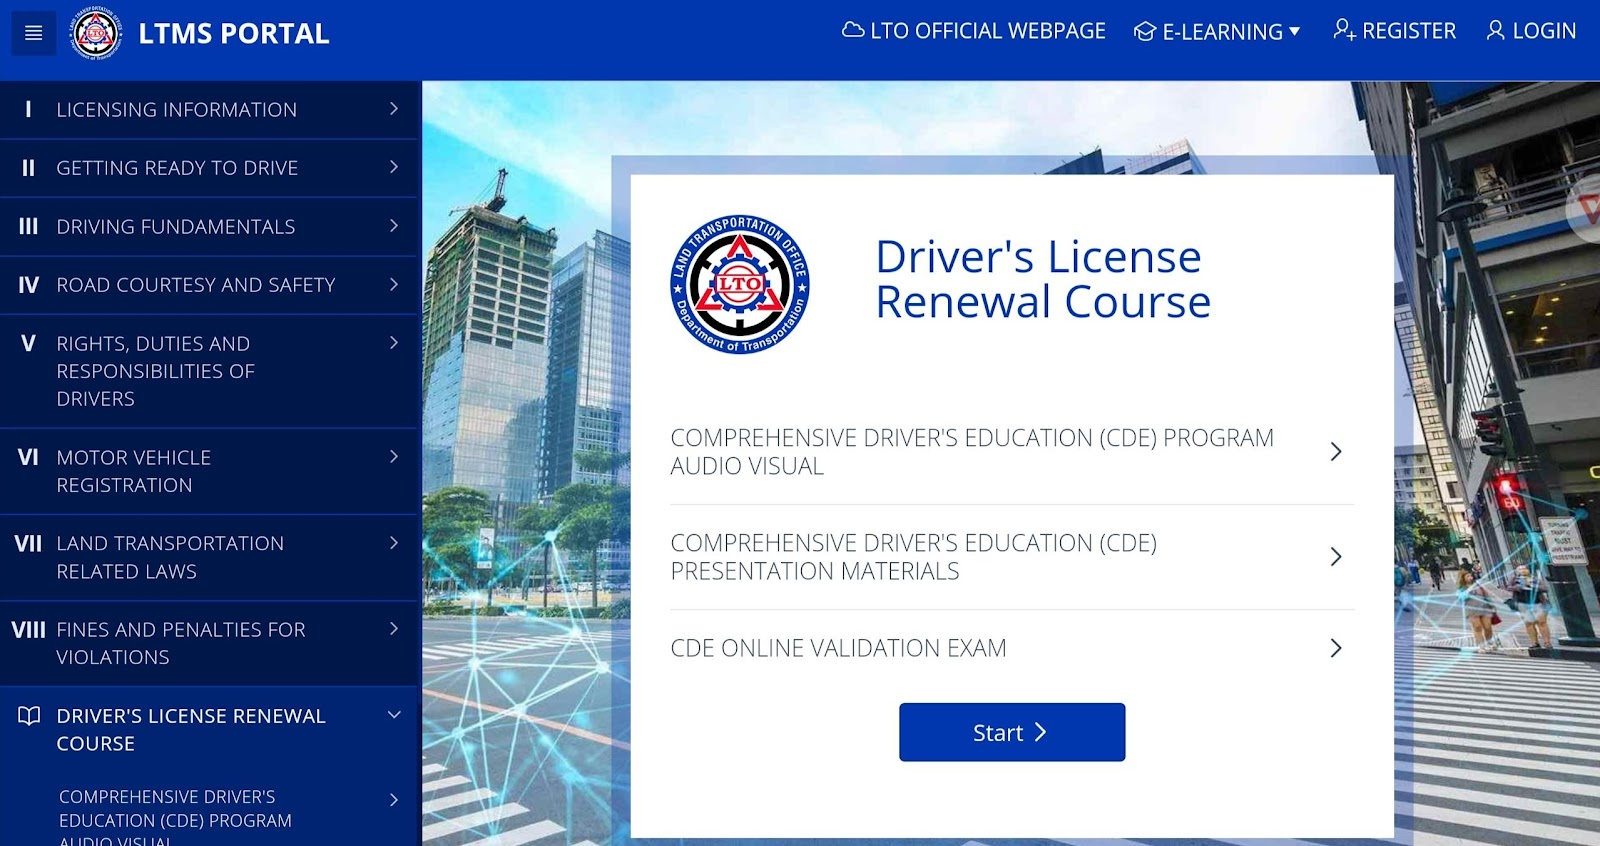 LTMS Portal for renewing Philippine Driver's License